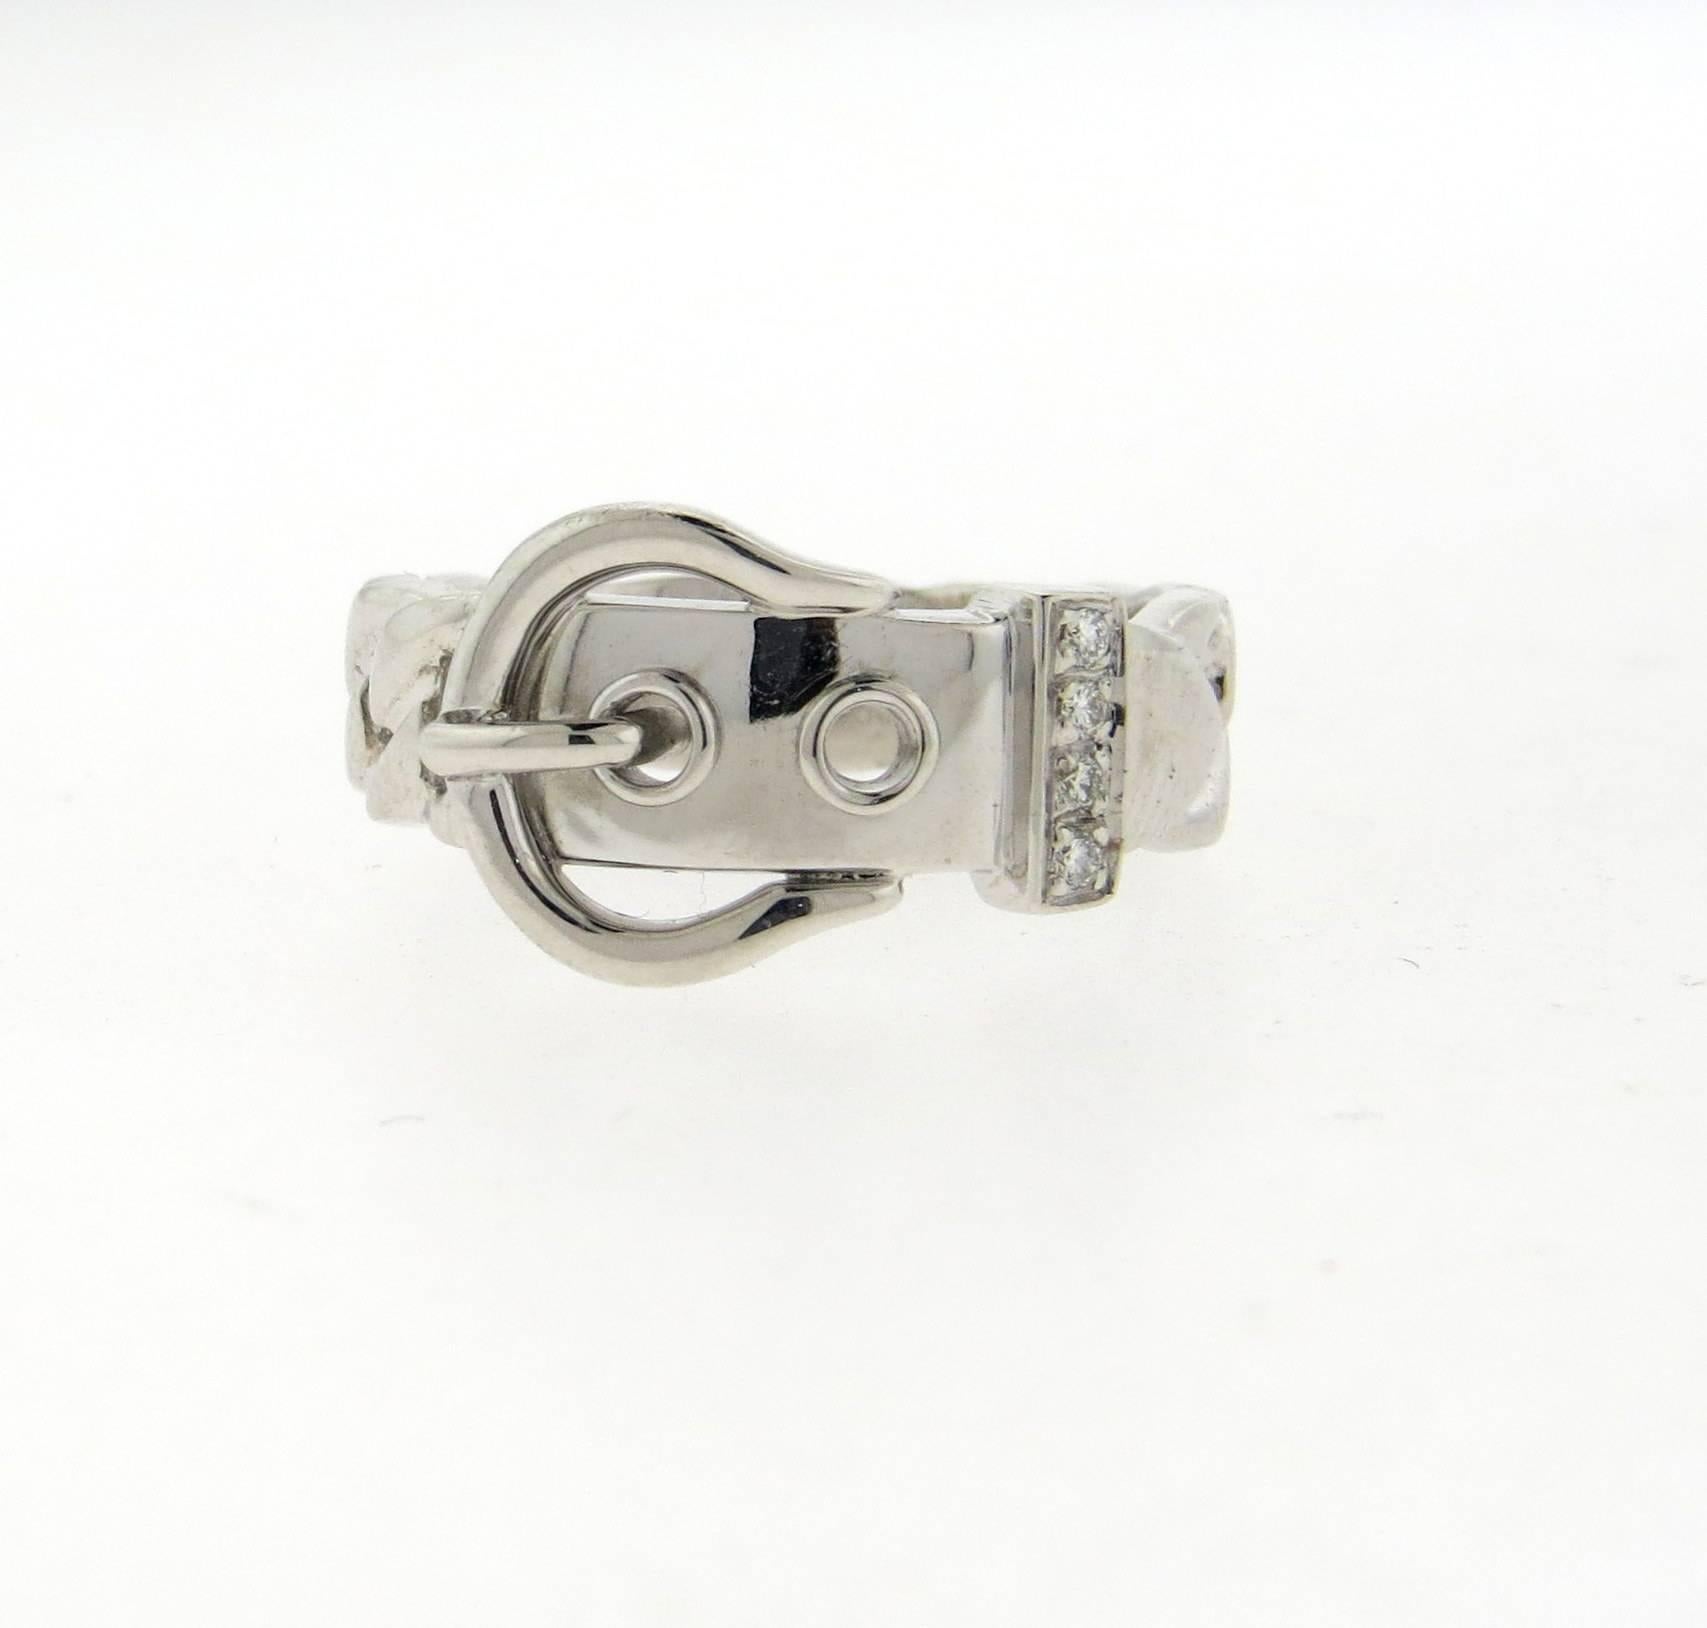 An 18k white gold band ring, crafted by Hermes, featuring buckle design, adorned with 0.04ctw in diamonds. Ring size 6, widest point is 10.5mm. Marked: Hermes, 0414476, 51, au750. Weight of the piece - 6.5 grams 